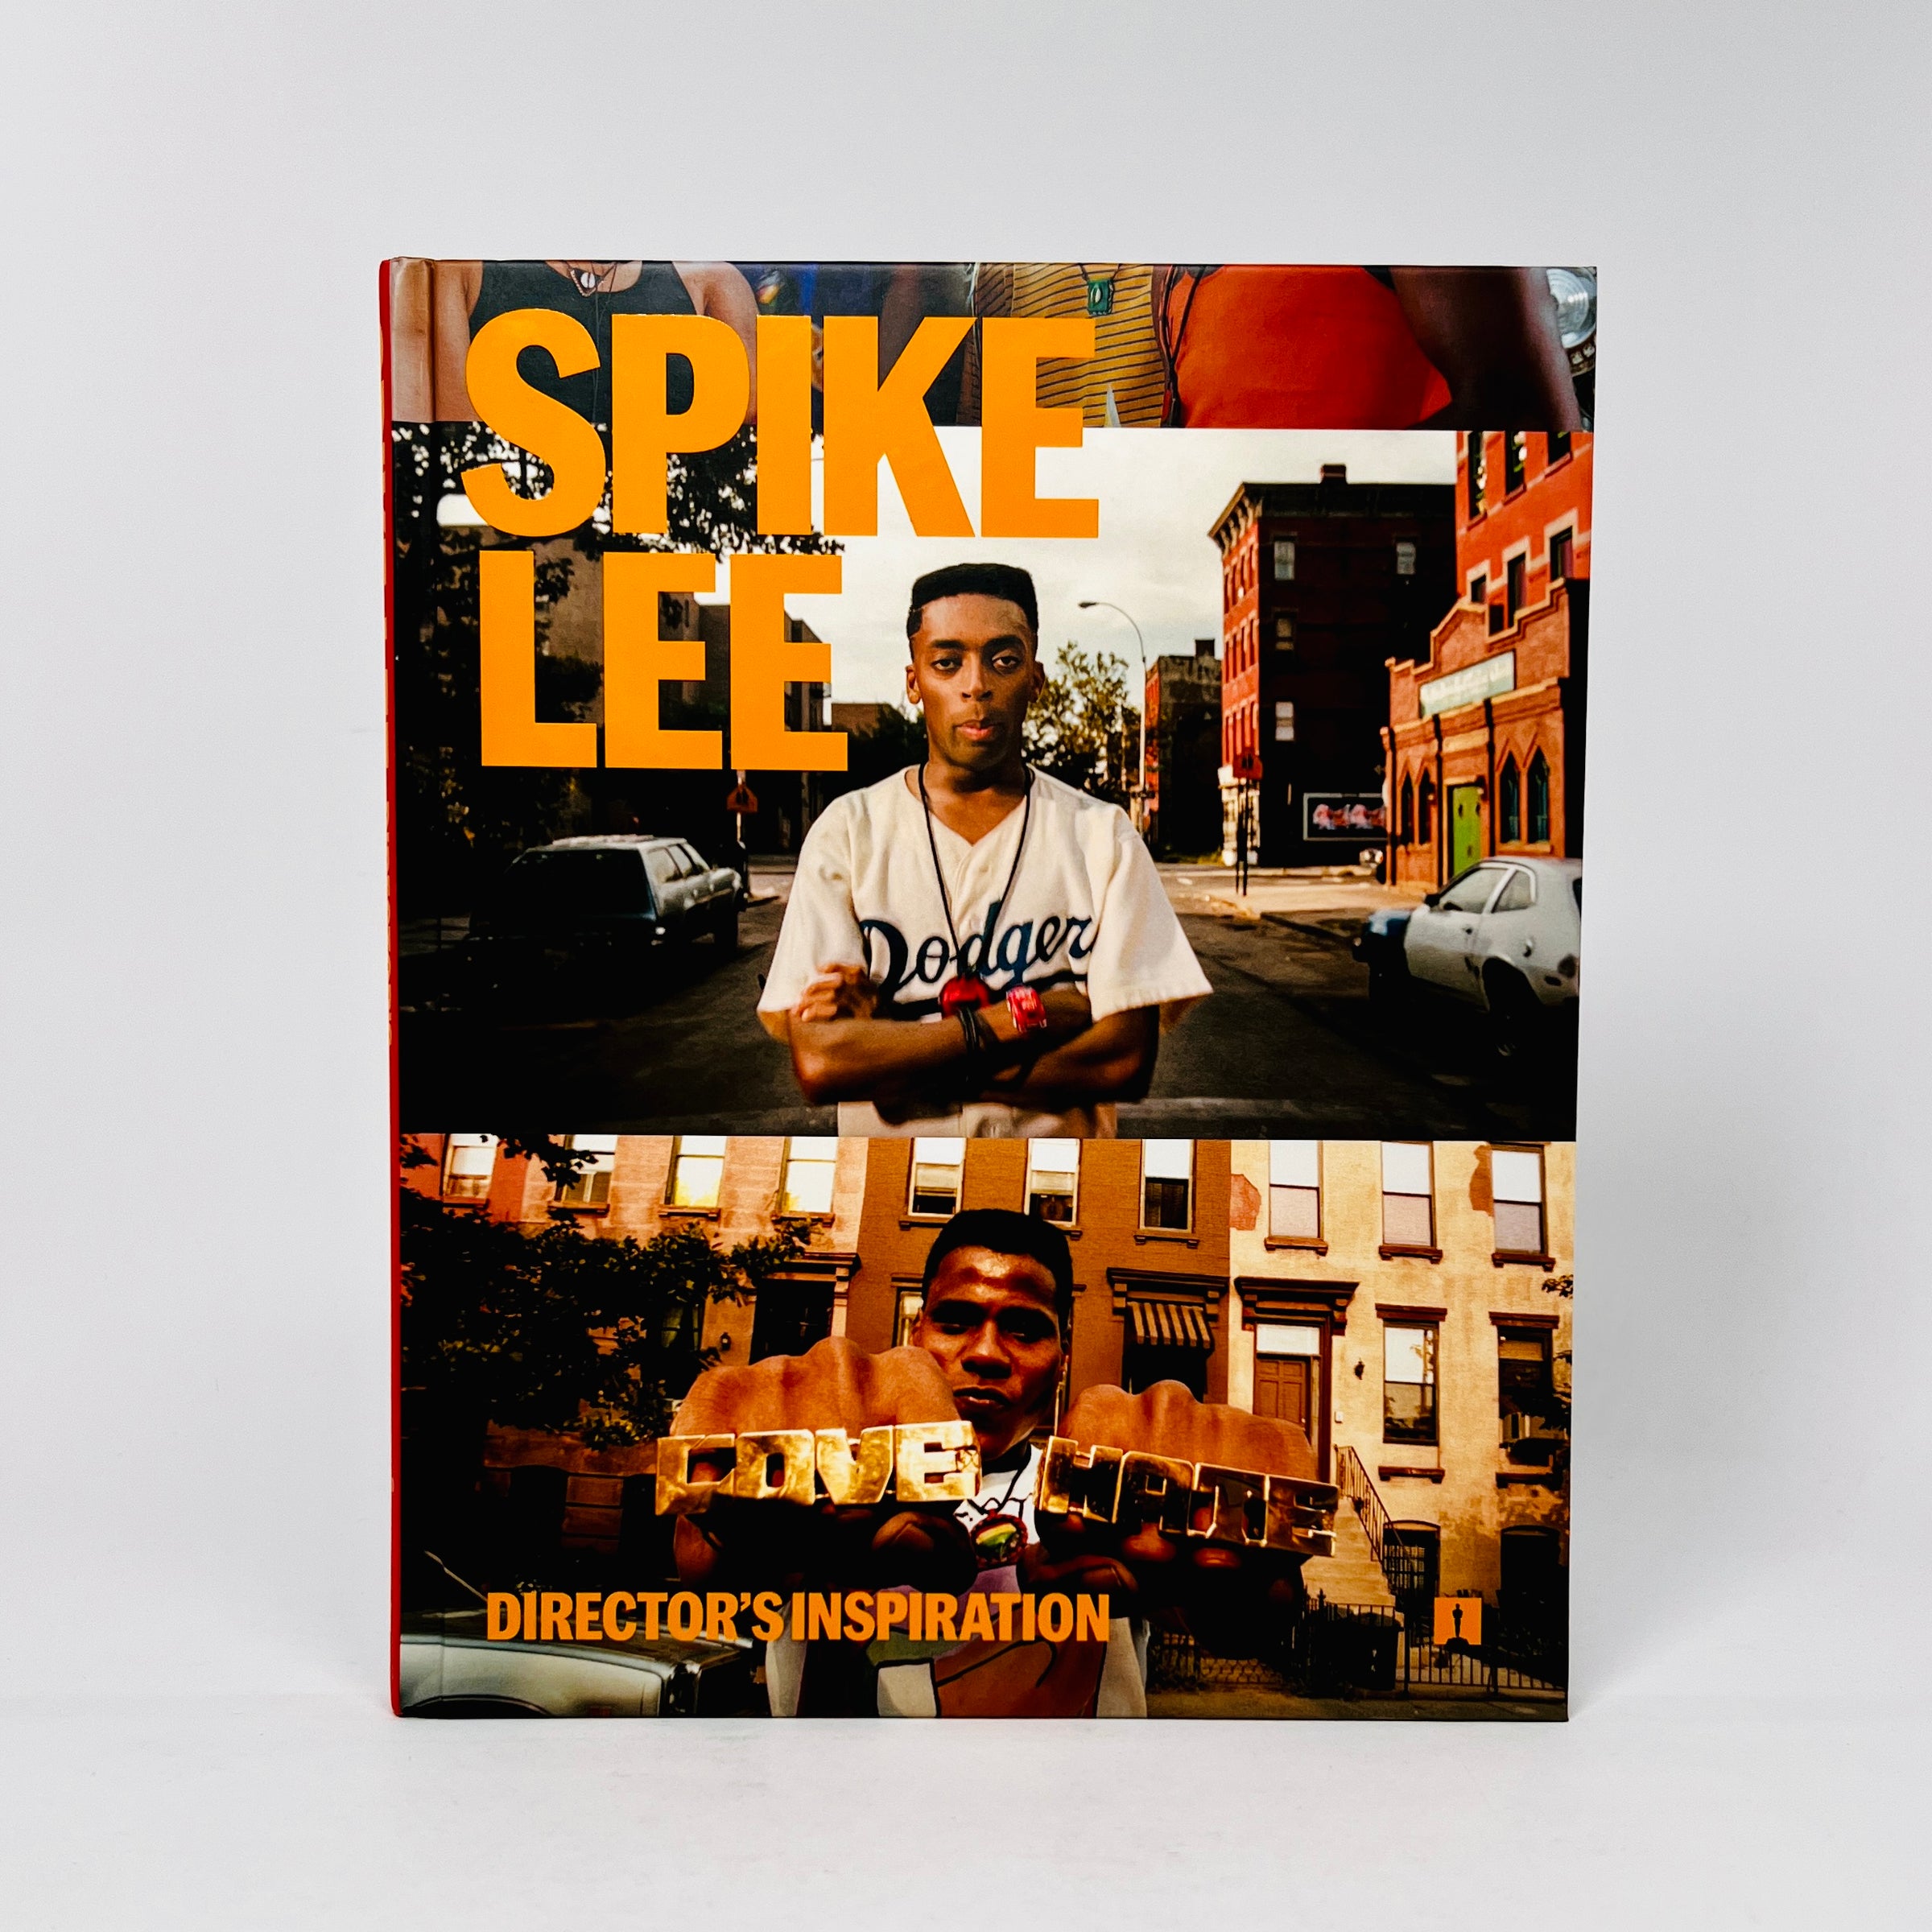 Hot Book Alert! 'Spike Lee: Director's Inspiration' is new this week